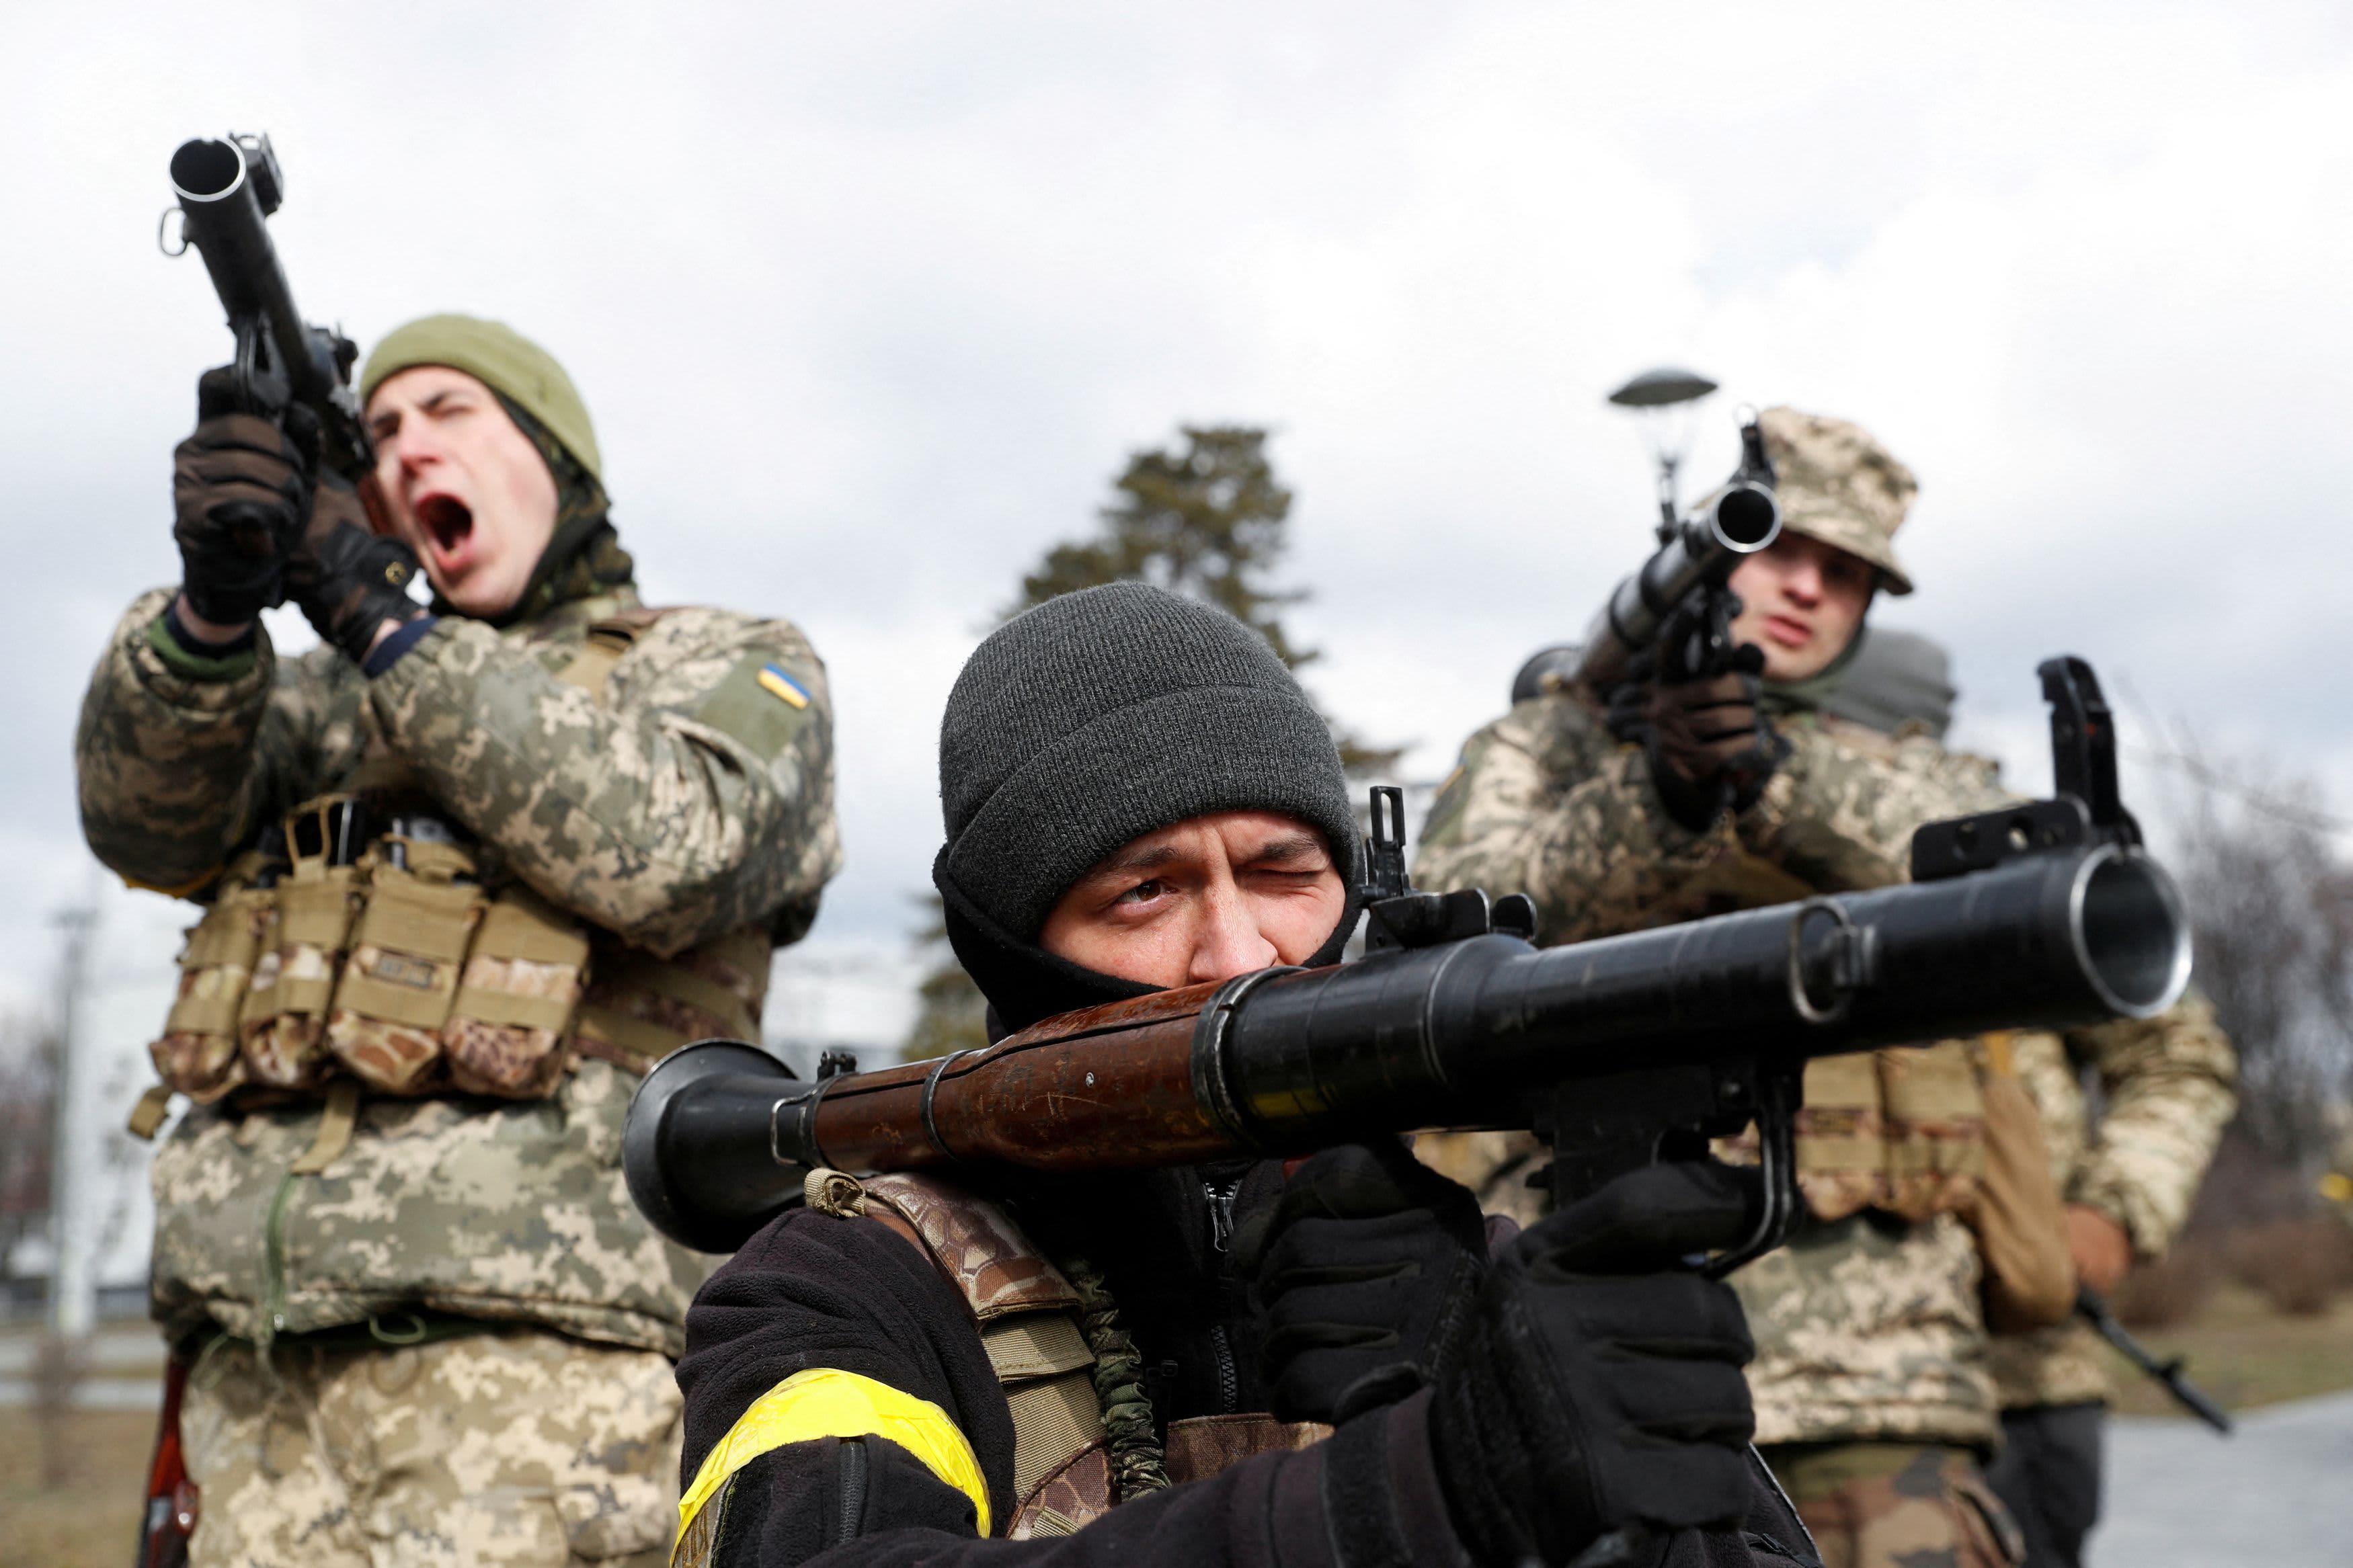 Pressure is building for the West to help defeat Russia — but there are some big risks involved